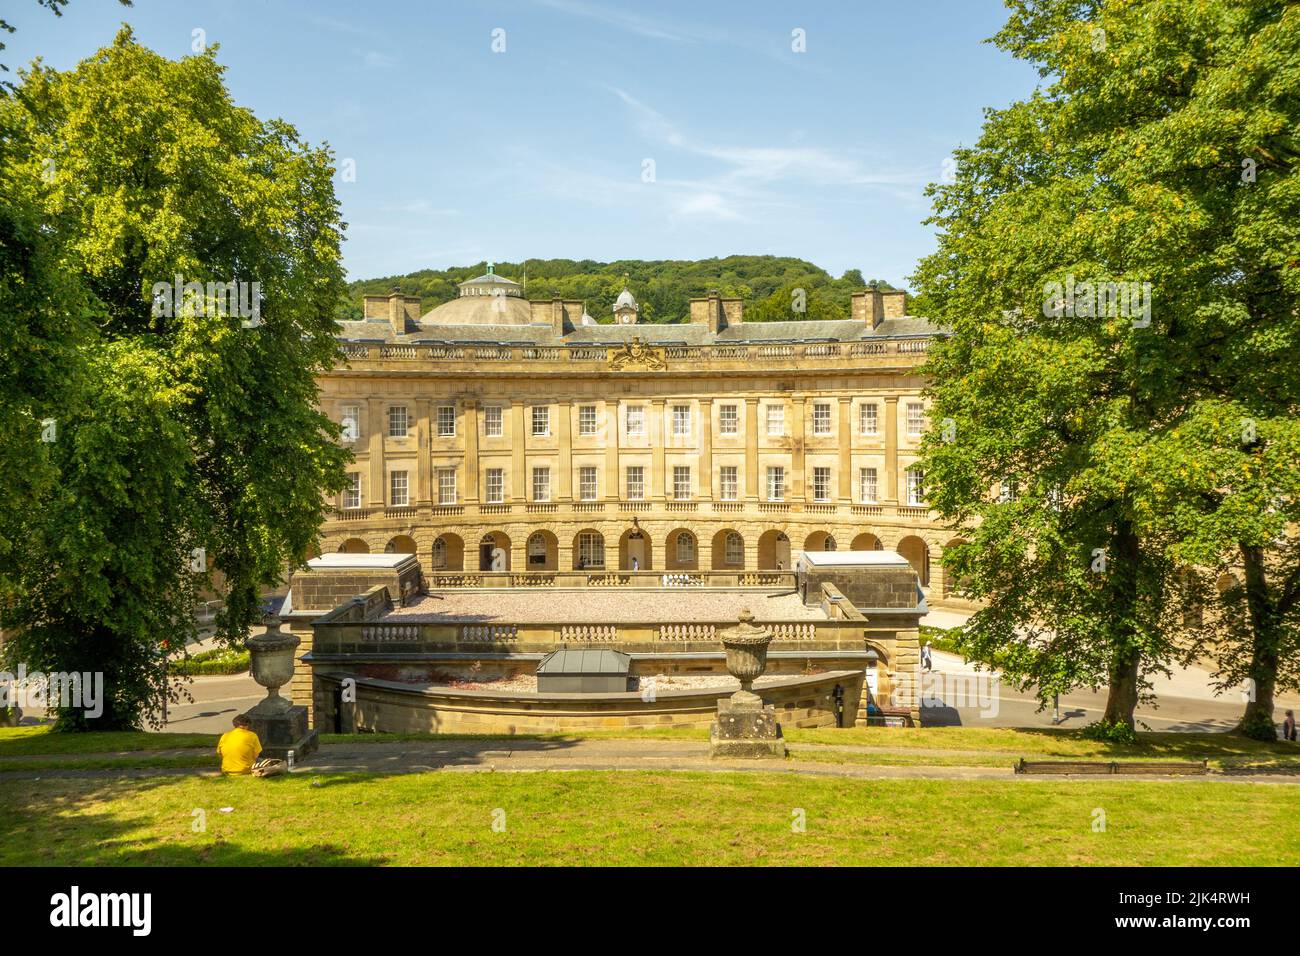 Crescent Hotel and Spa, Grade II-listed building in Buxton Derbyshire seen here with the pump room in the foreground Stock Photo